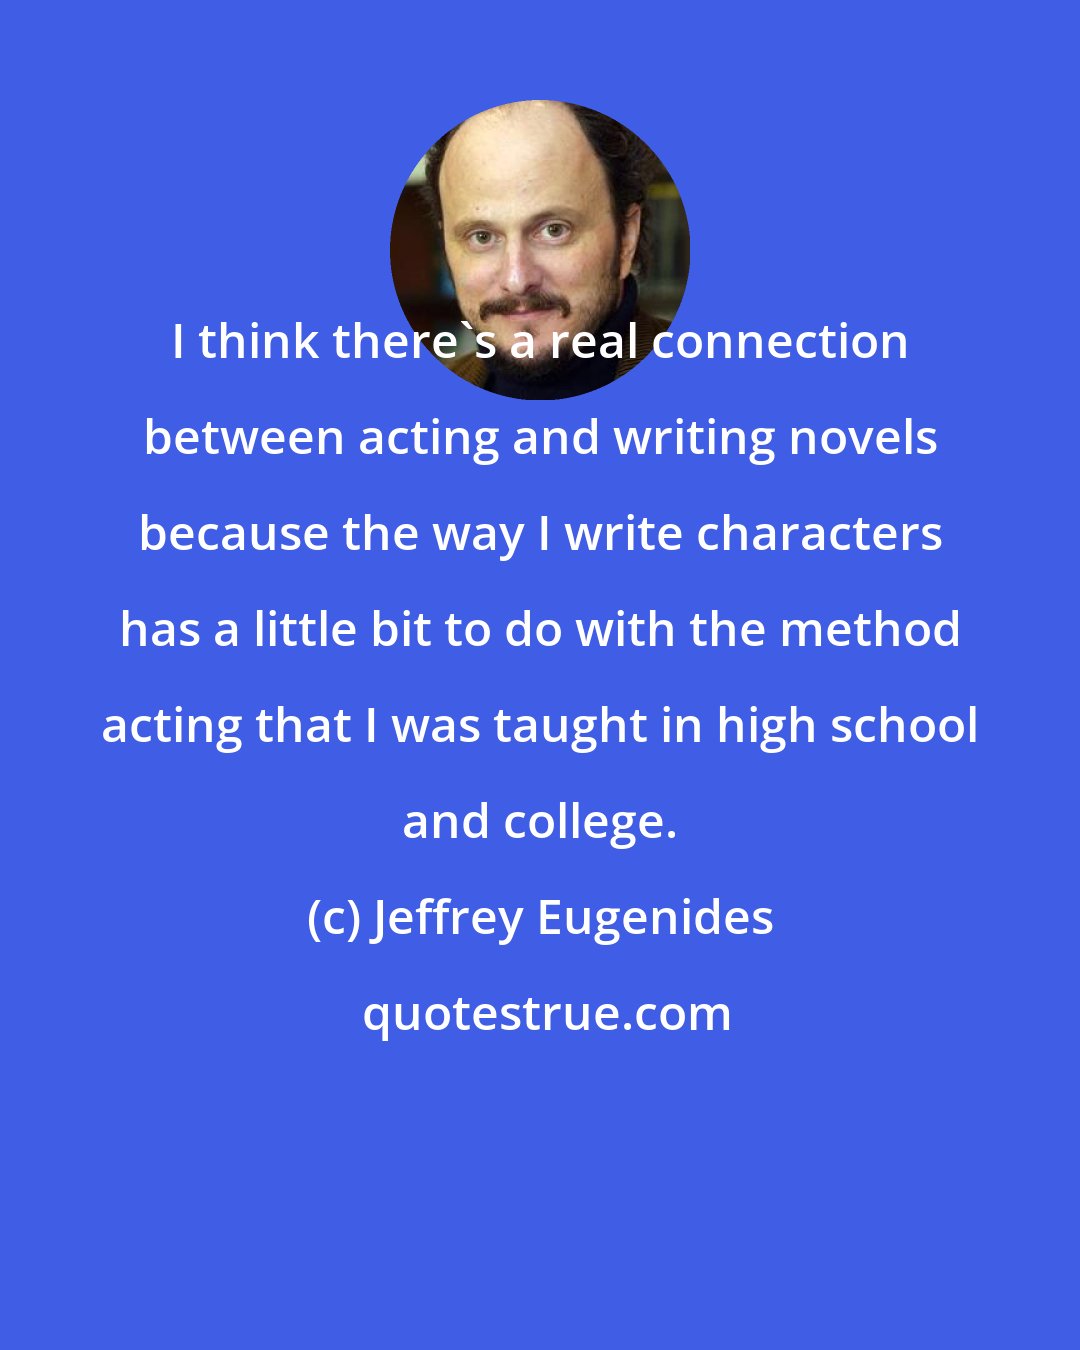 Jeffrey Eugenides: I think there's a real connection between acting and writing novels because the way I write characters has a little bit to do with the method acting that I was taught in high school and college.